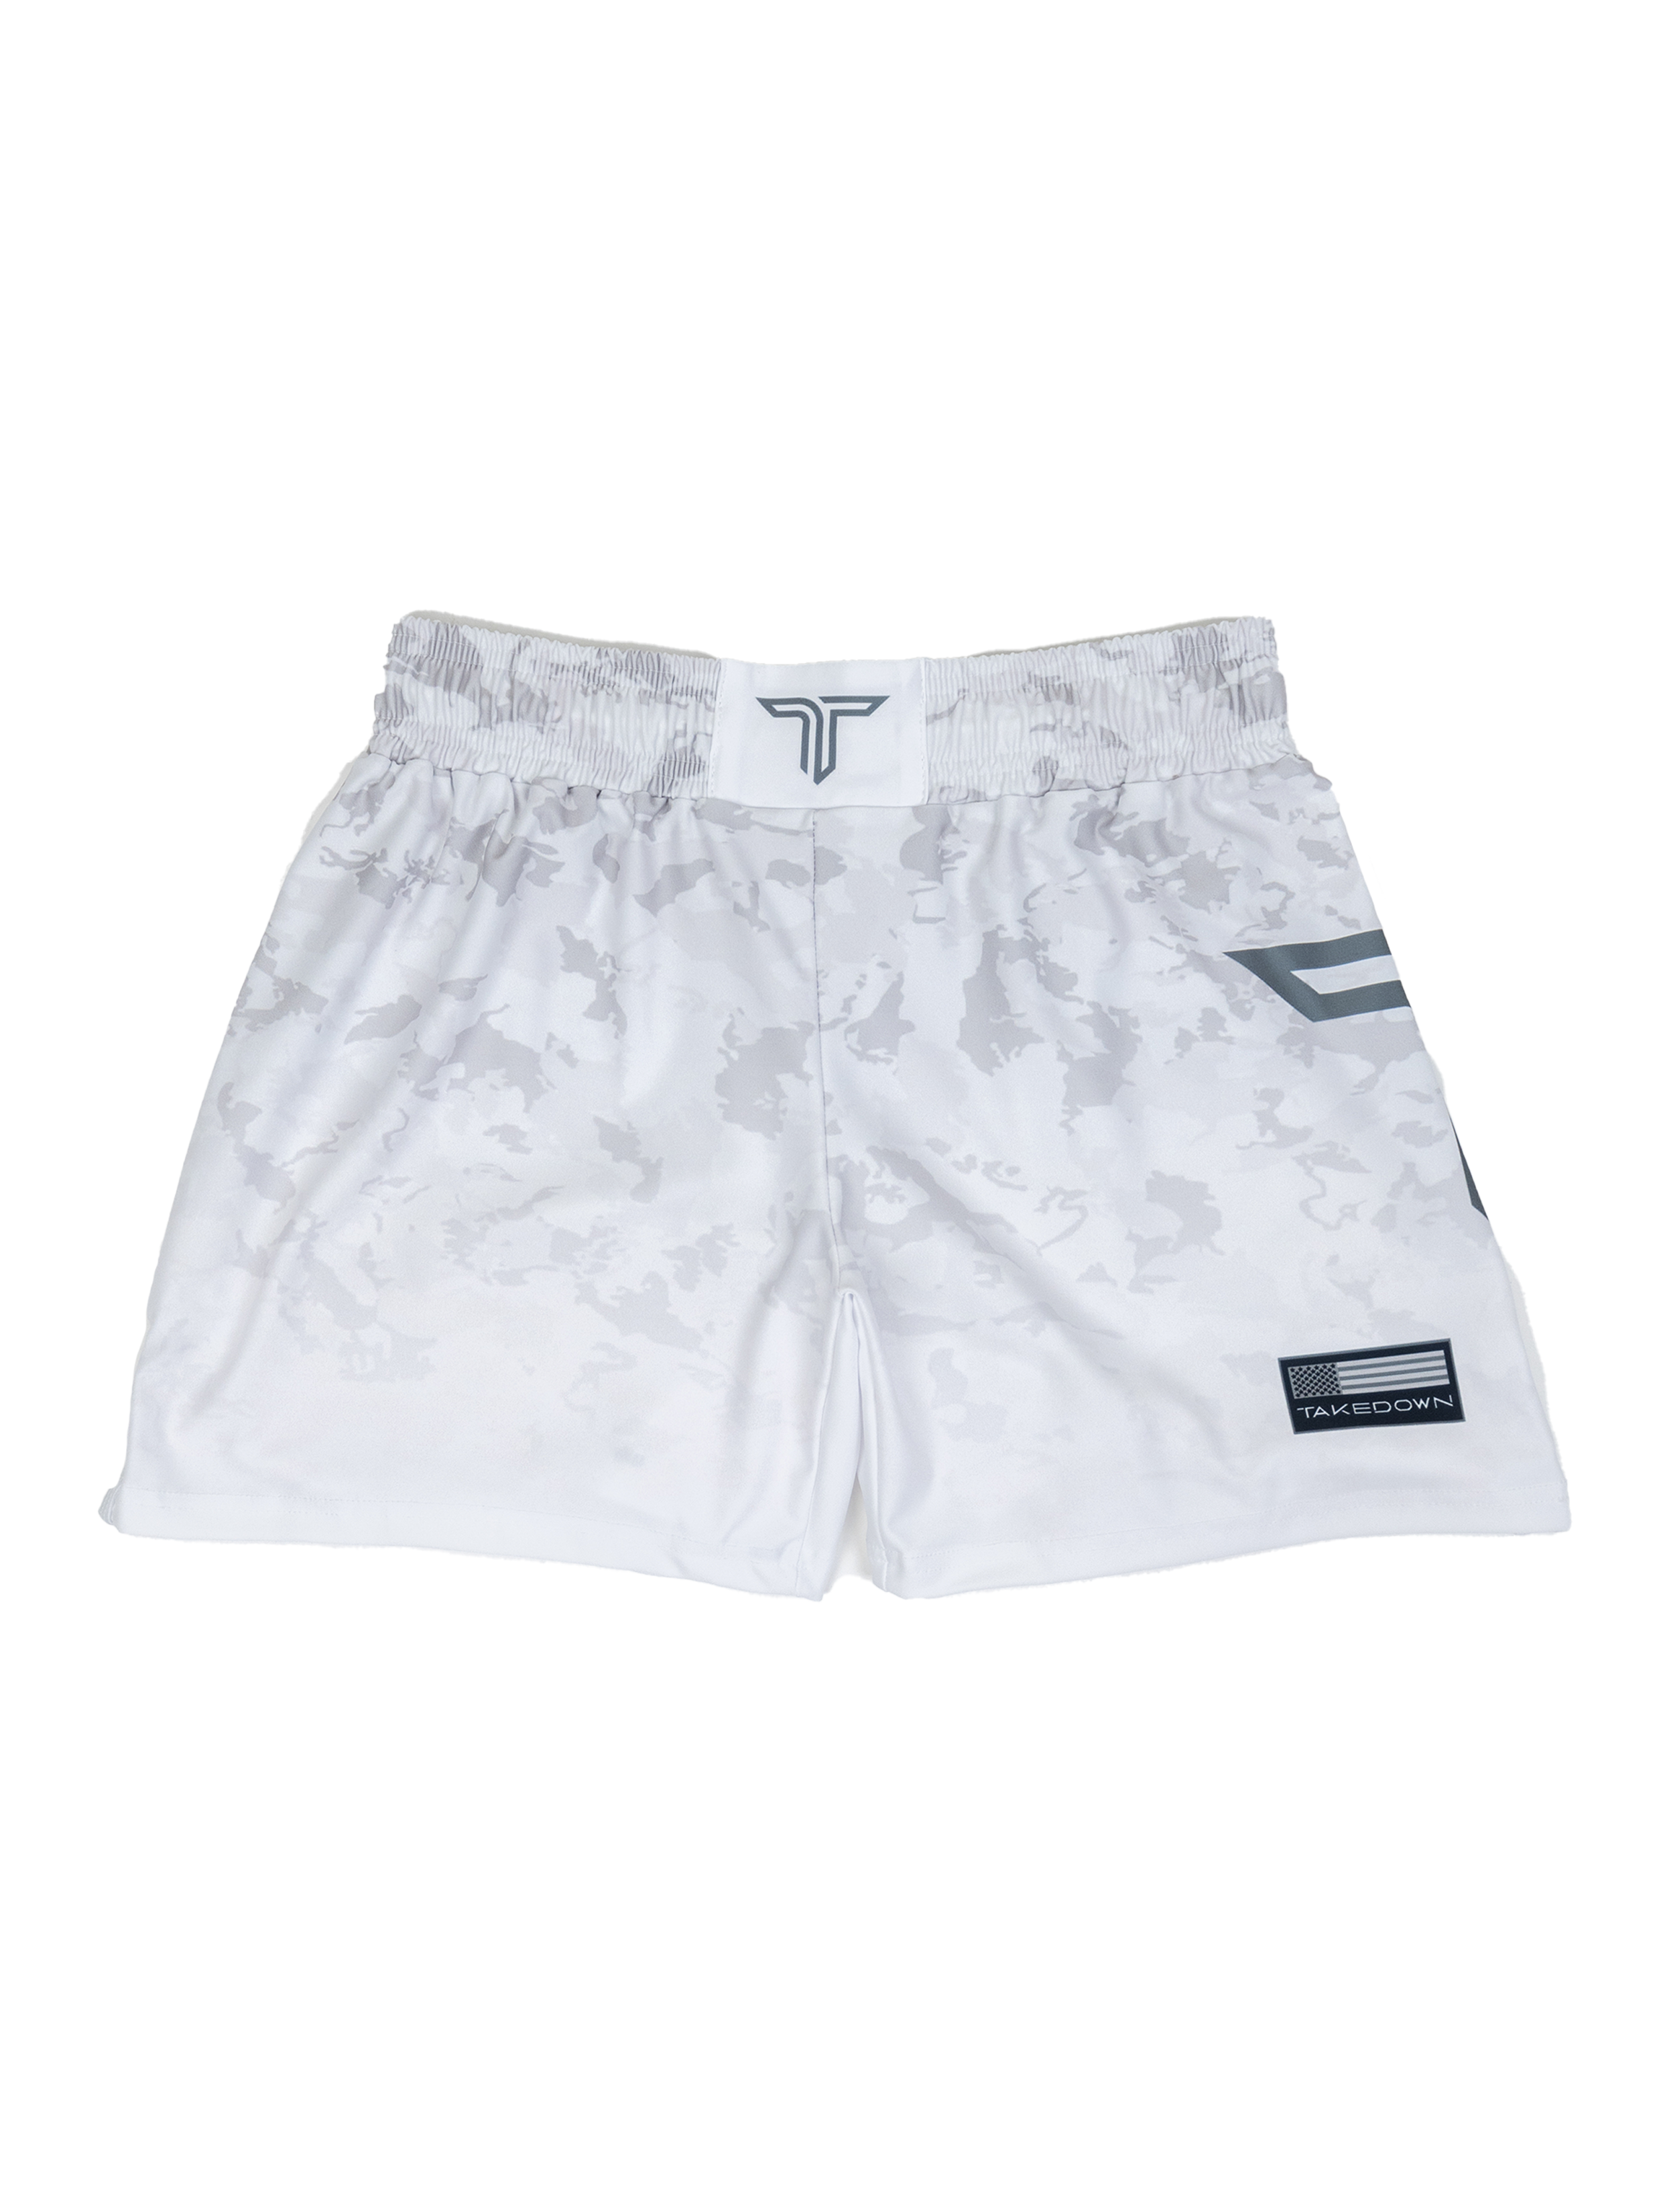 Particle Camo Women's Fight Shorts - Ghost Grey (3